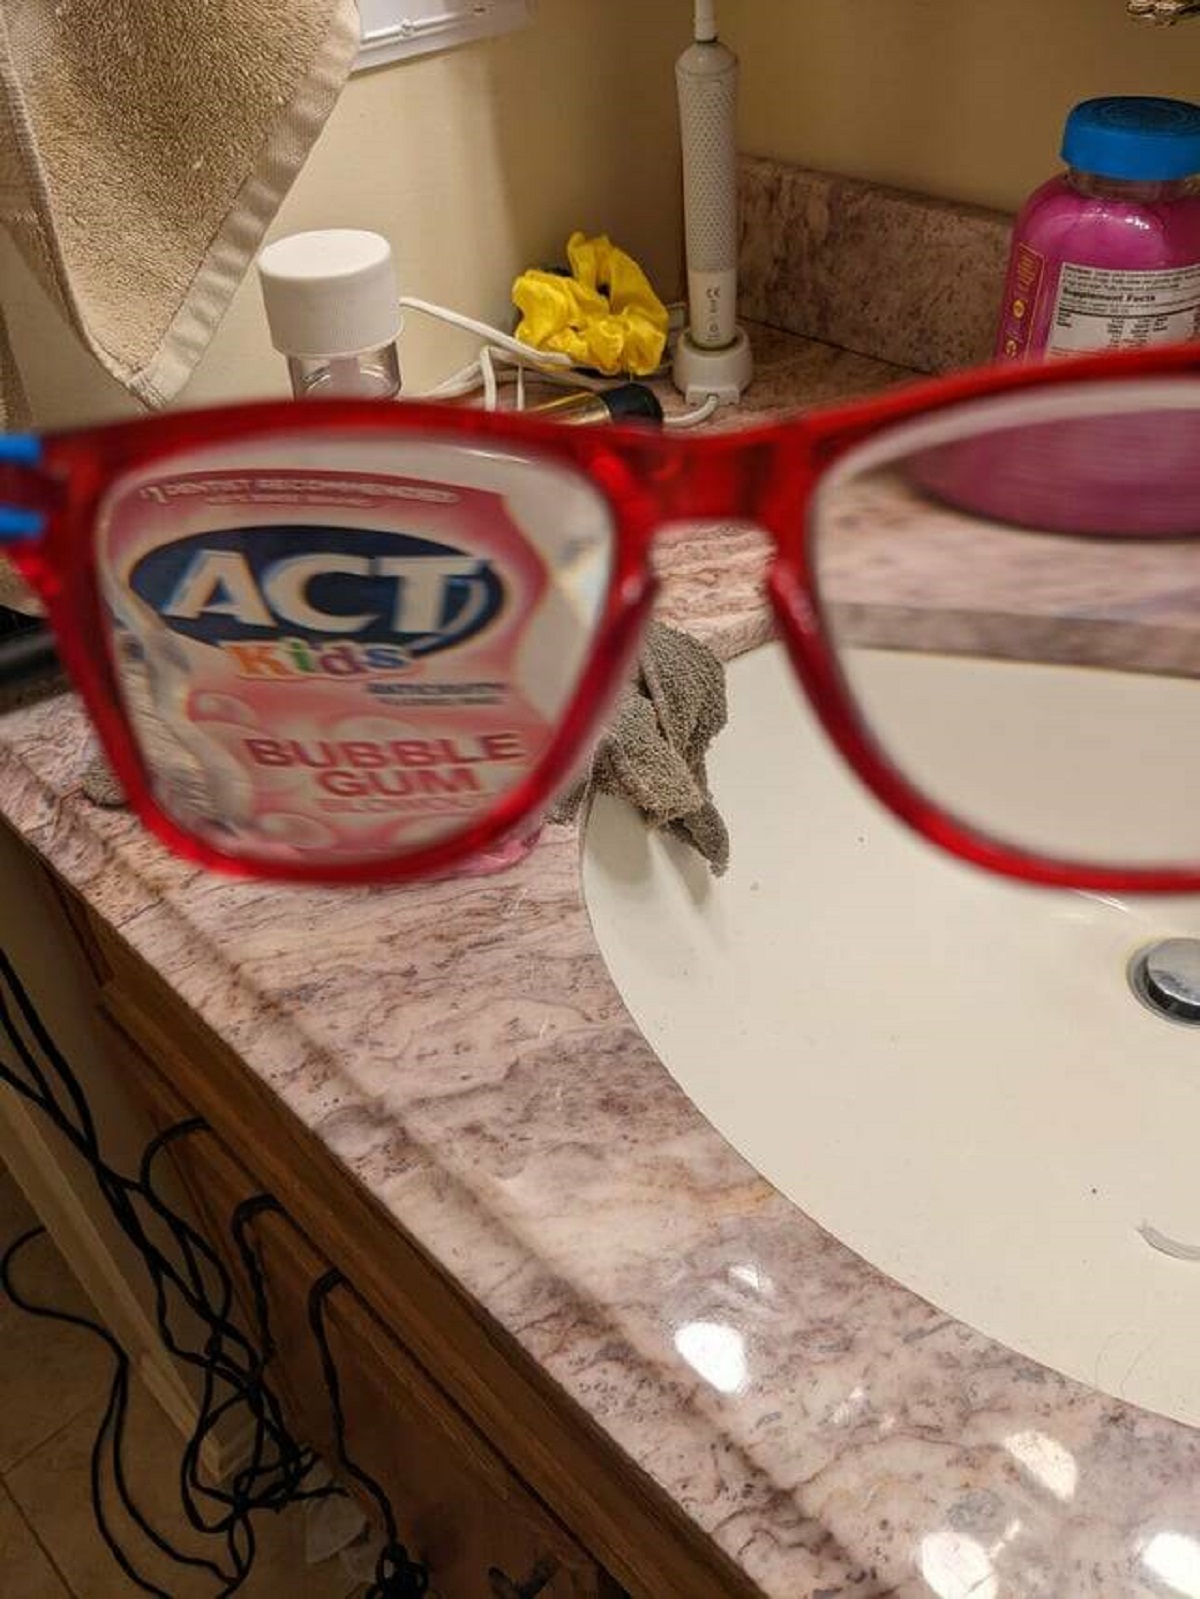 "What looking through my little guy's (20/500 vision) glasses looks like"